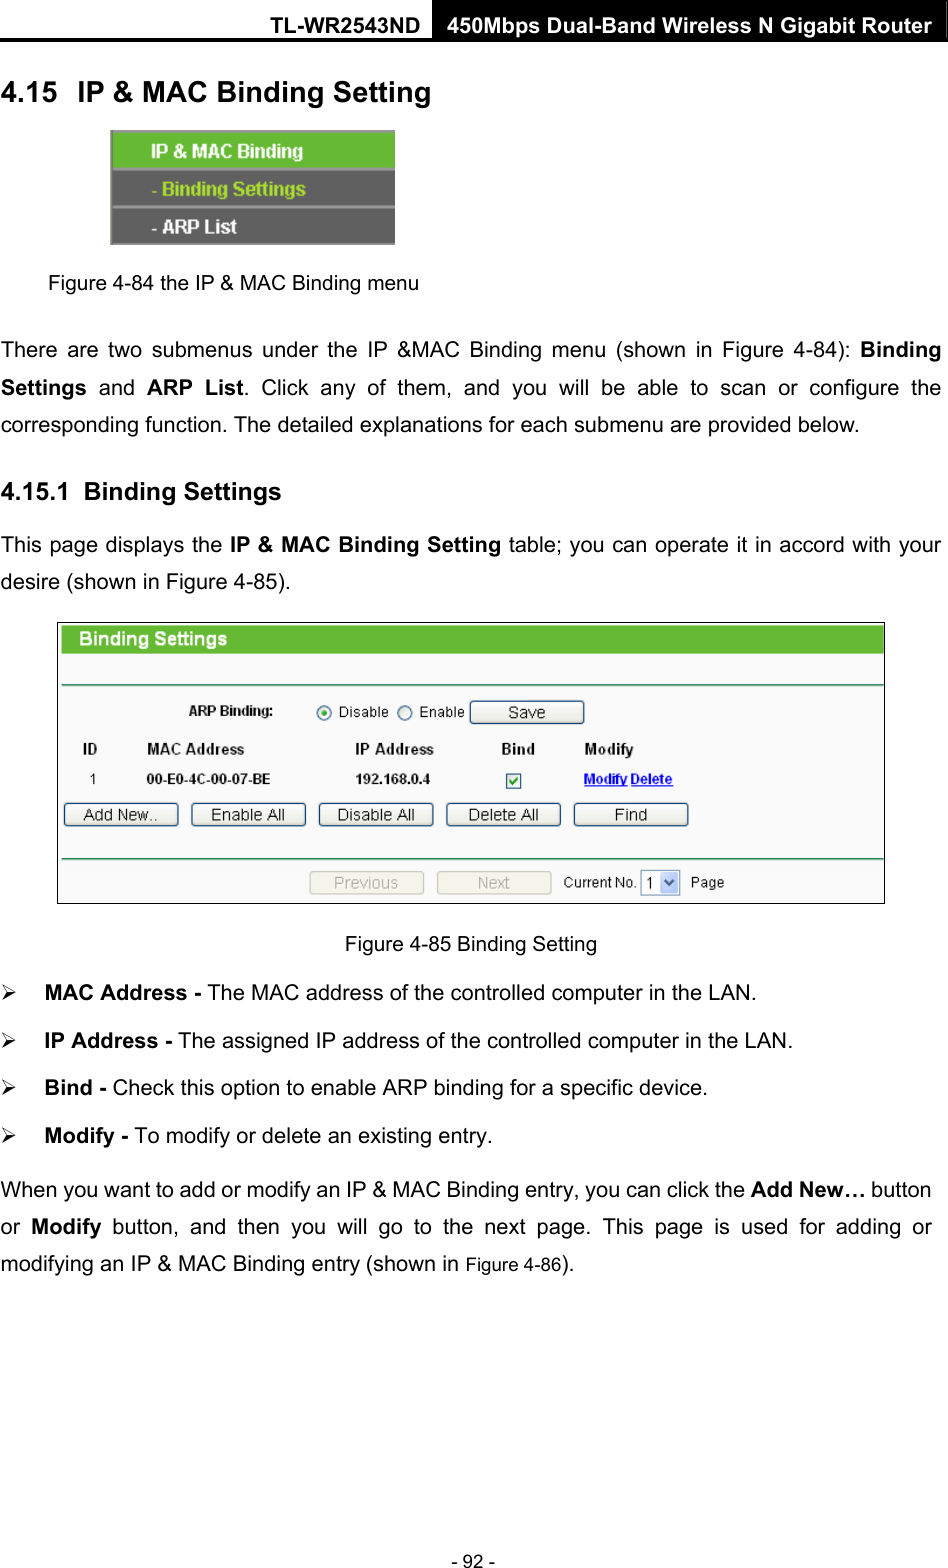 TL-WR2543ND 450Mbps Dual-Band Wireless N Gigabit Router - 92 - 4.15  IP &amp; MAC Binding Setting  Figure 4-84 the IP &amp; MAC Binding menu There are two submenus under the IP &amp;MAC Binding menu (shown in Figure 4-84): Binding Settings  and ARP List. Click any of them, and you will be able to scan or configure the corresponding function. The detailed explanations for each submenu are provided below. 4.15.1  Binding Settings This page displays the IP &amp; MAC Binding Setting table; you can operate it in accord with your desire (shown in Figure 4-85).    Figure 4-85 Binding Setting ¾ MAC Address - The MAC address of the controlled computer in the LAN.   ¾ IP Address - The assigned IP address of the controlled computer in the LAN.   ¾ Bind - Check this option to enable ARP binding for a specific device.   ¾ Modify - To modify or delete an existing entry.   When you want to add or modify an IP &amp; MAC Binding entry, you can click the Add New… button or  Modify button, and then you will go to the next page. This page is used for adding or modifying an IP &amp; MAC Binding entry (shown in Figure 4-86).   